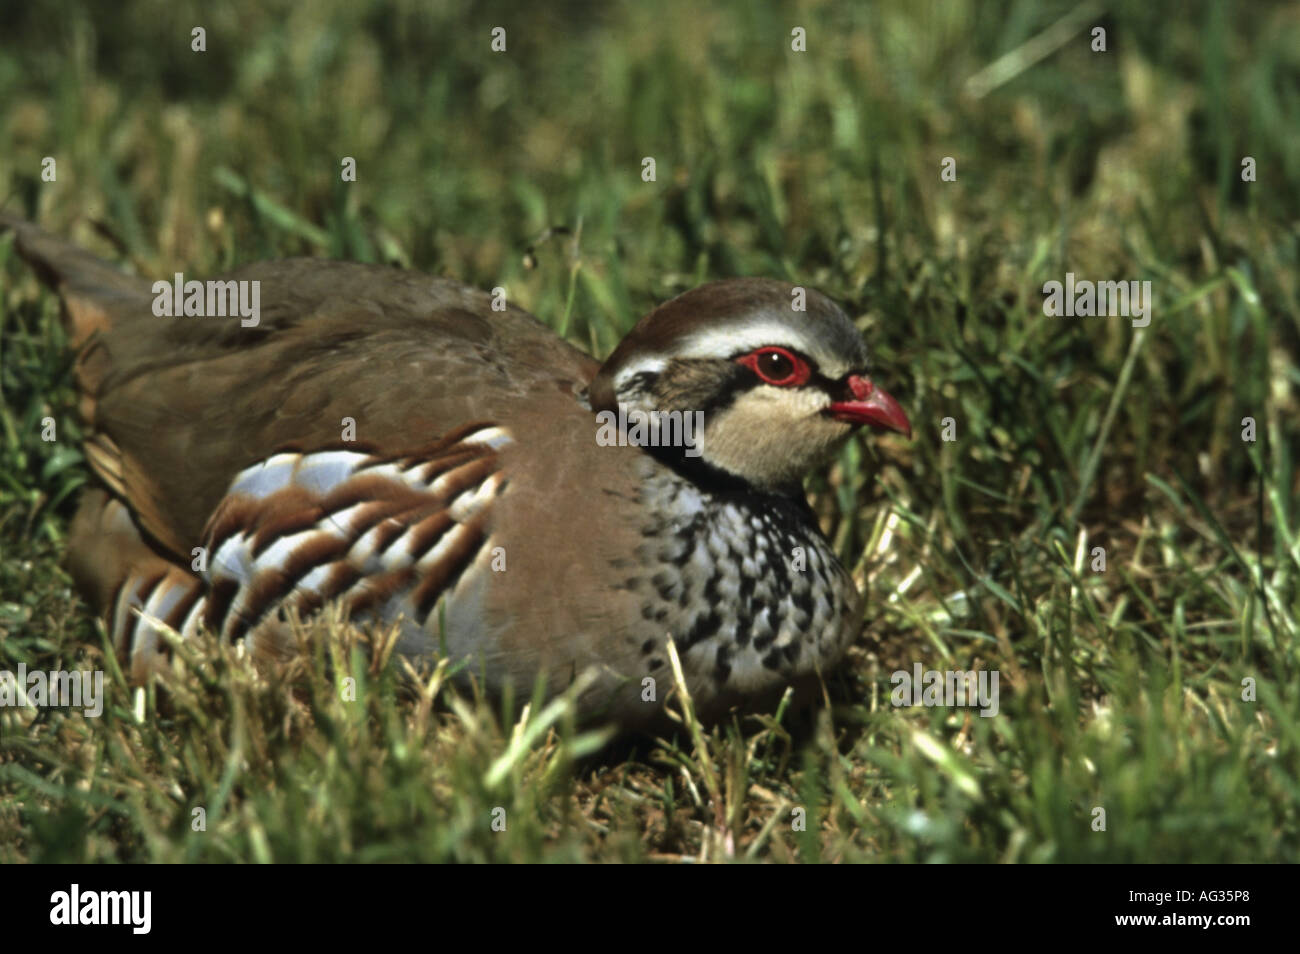 zoology / animals, avian / bird, Phasianidae, Red-legged Partridge (Alectoris rufa), sitting on grass, Crau, France, distribution: Europe, Additional-Rights-Clearance-Info-Not-Available Stock Photo